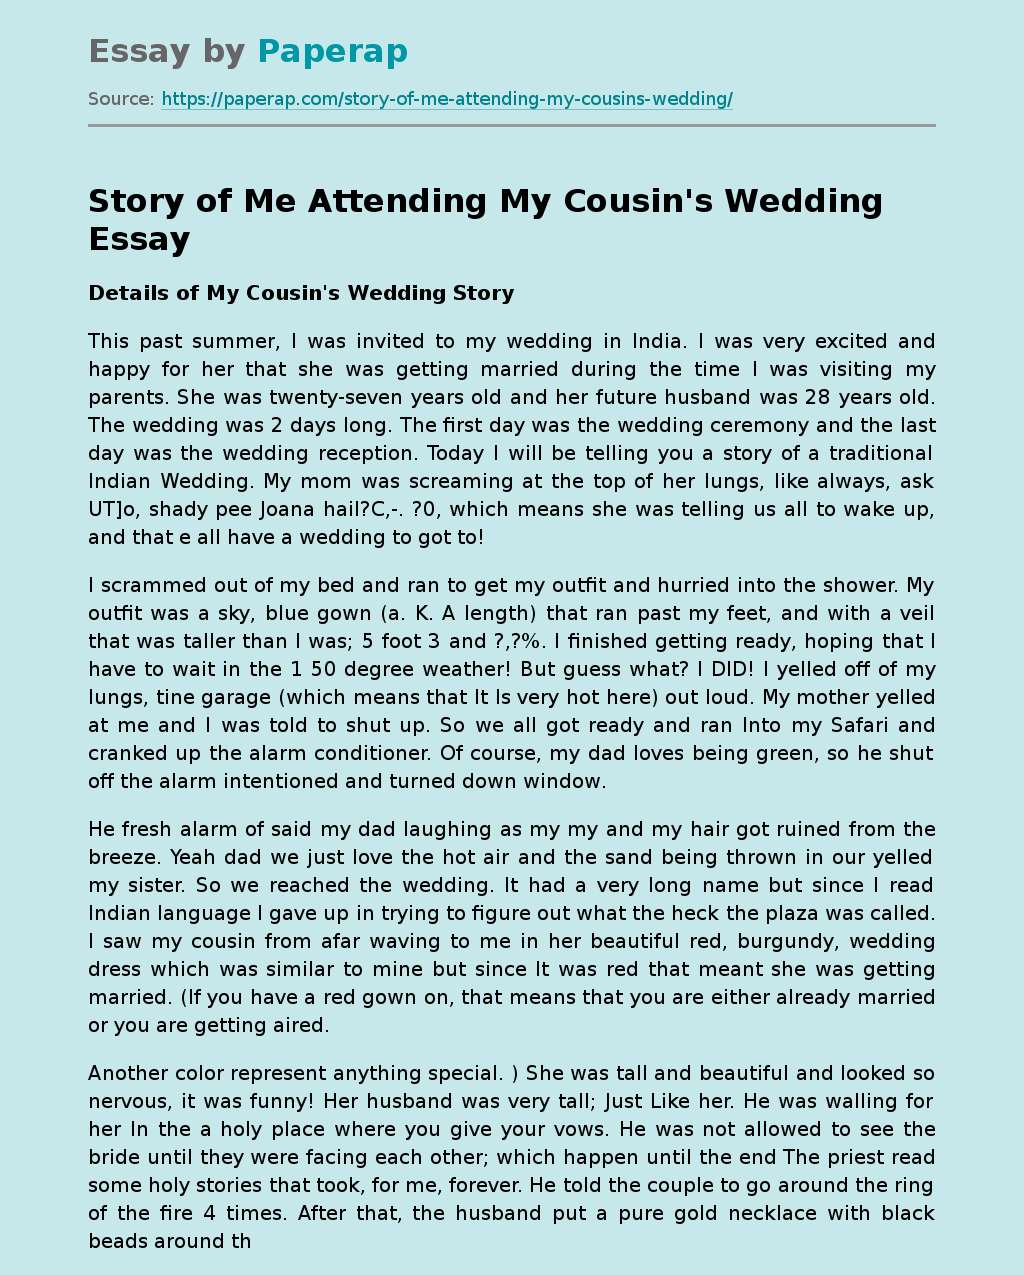 Story of Me Attending My Cousin's Wedding